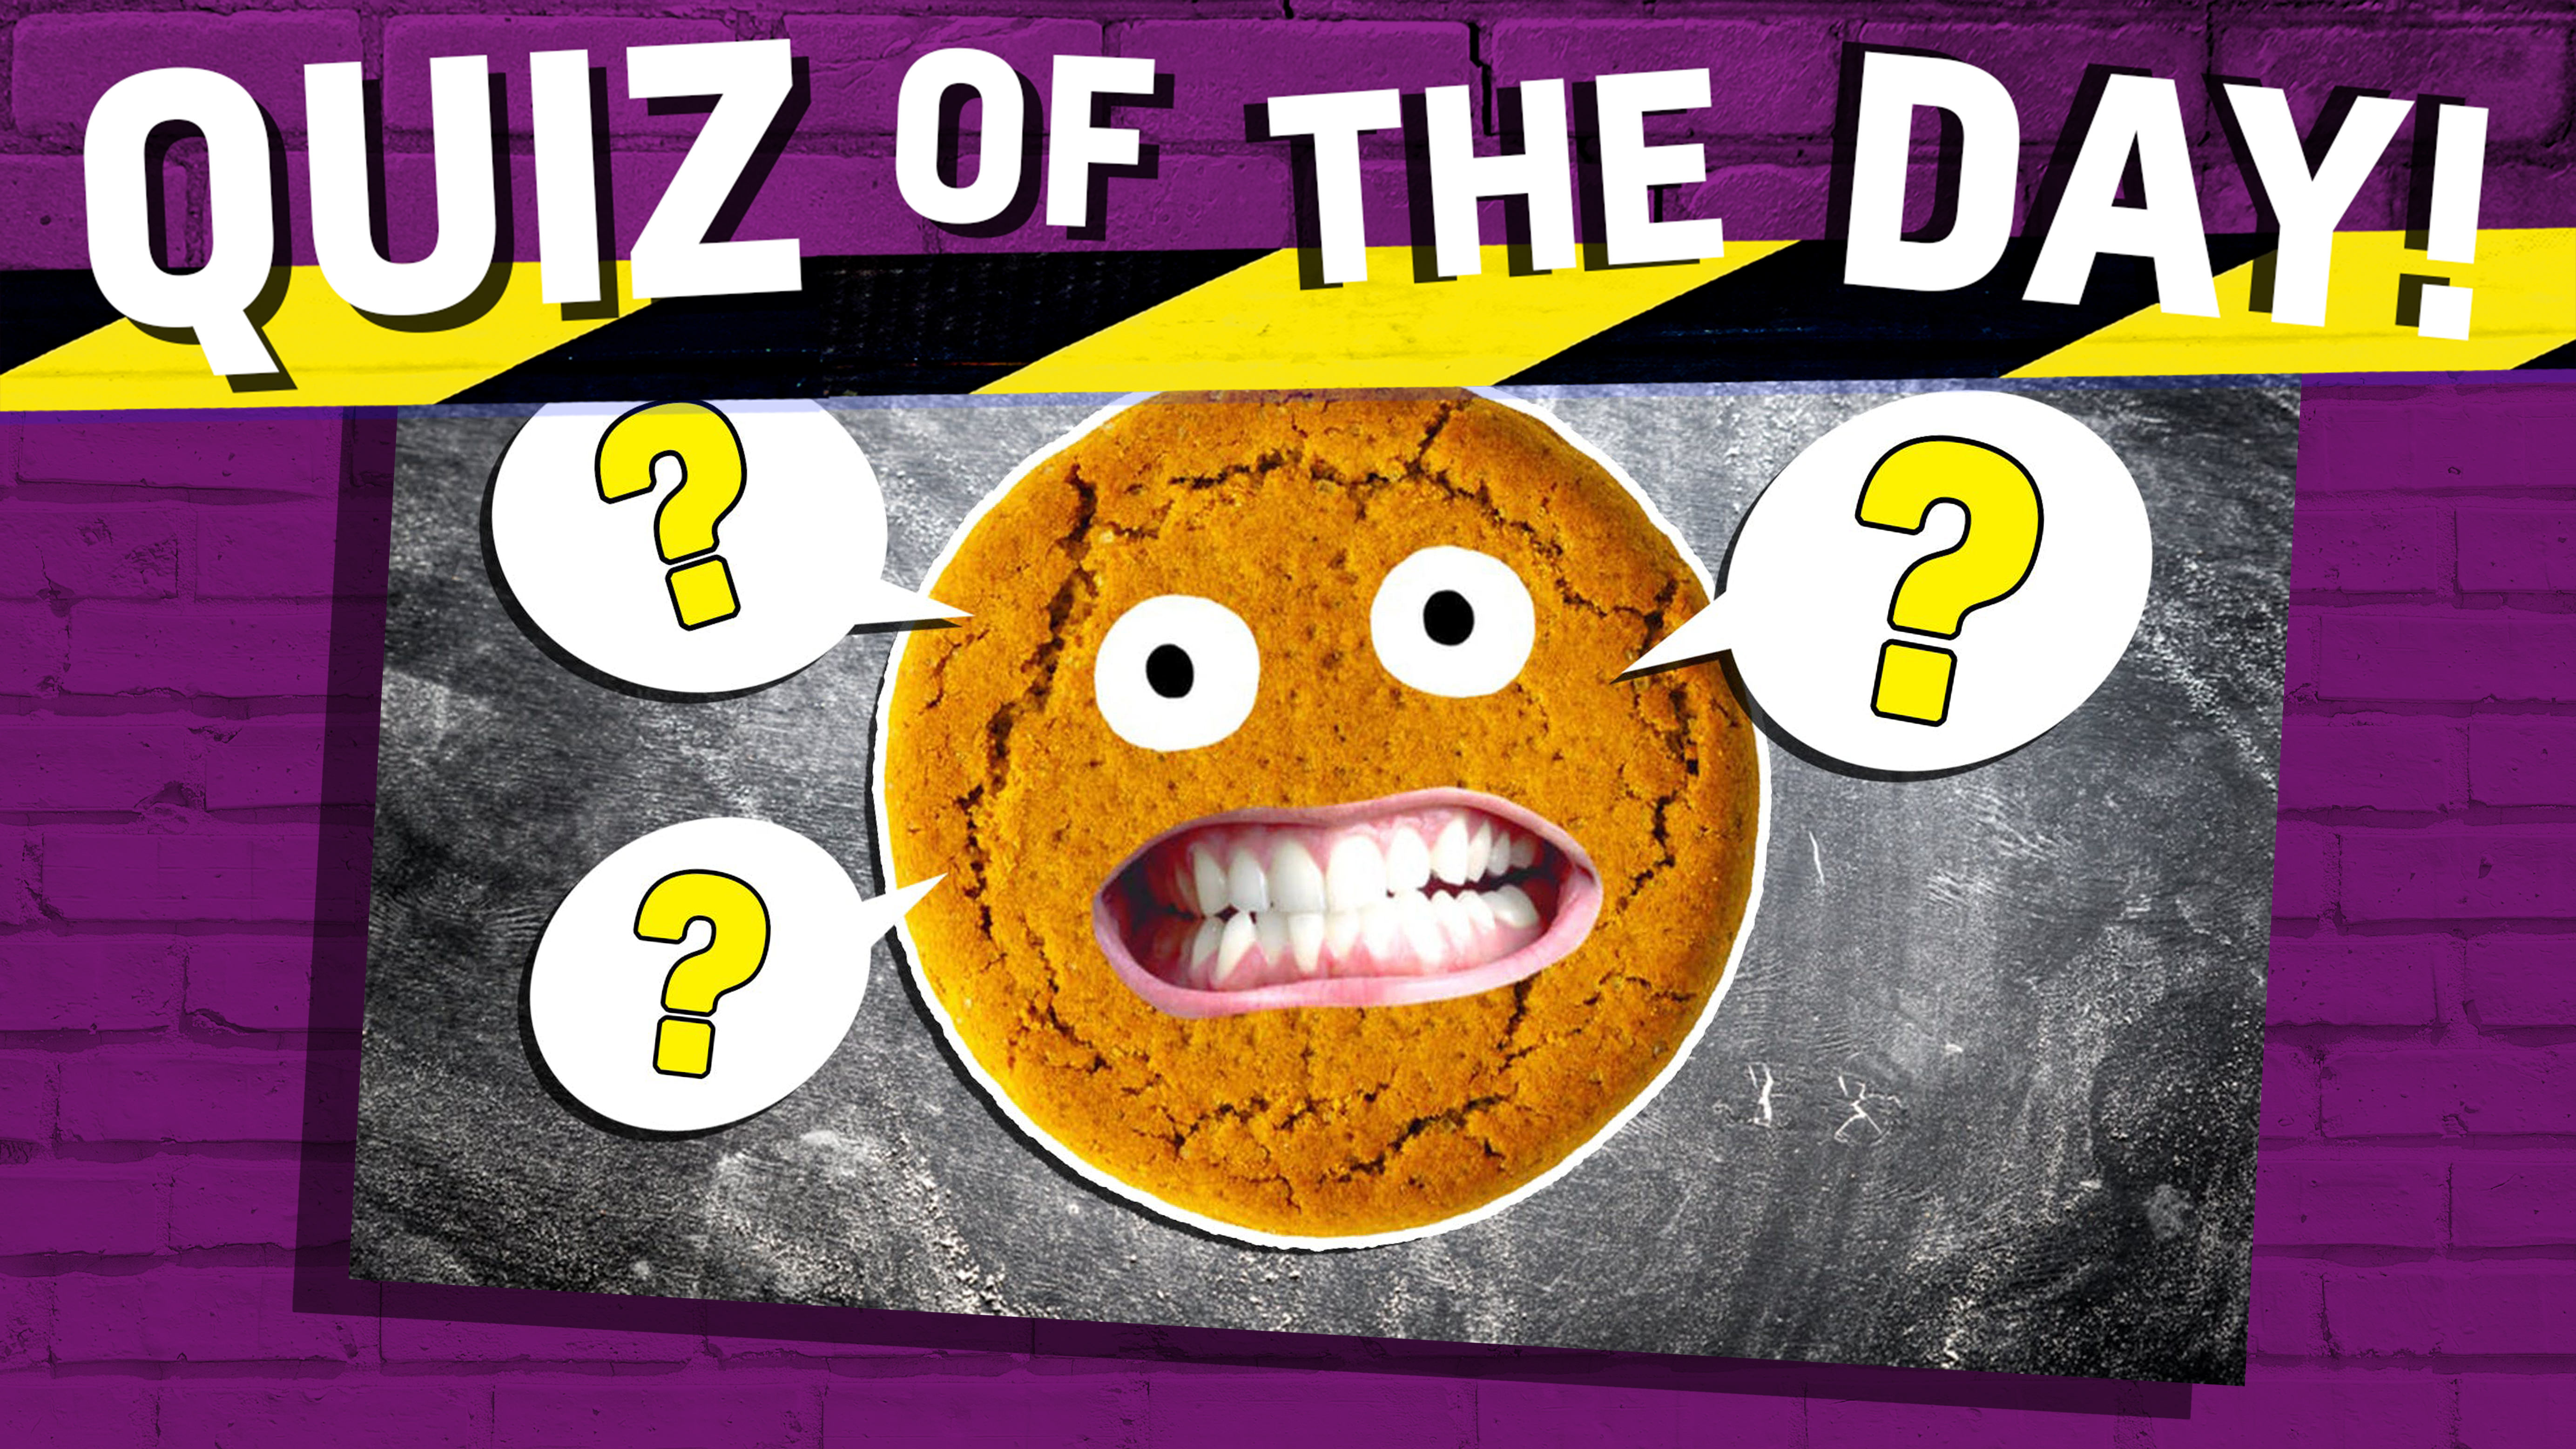 The Ultimate Biscuit Name Quiz